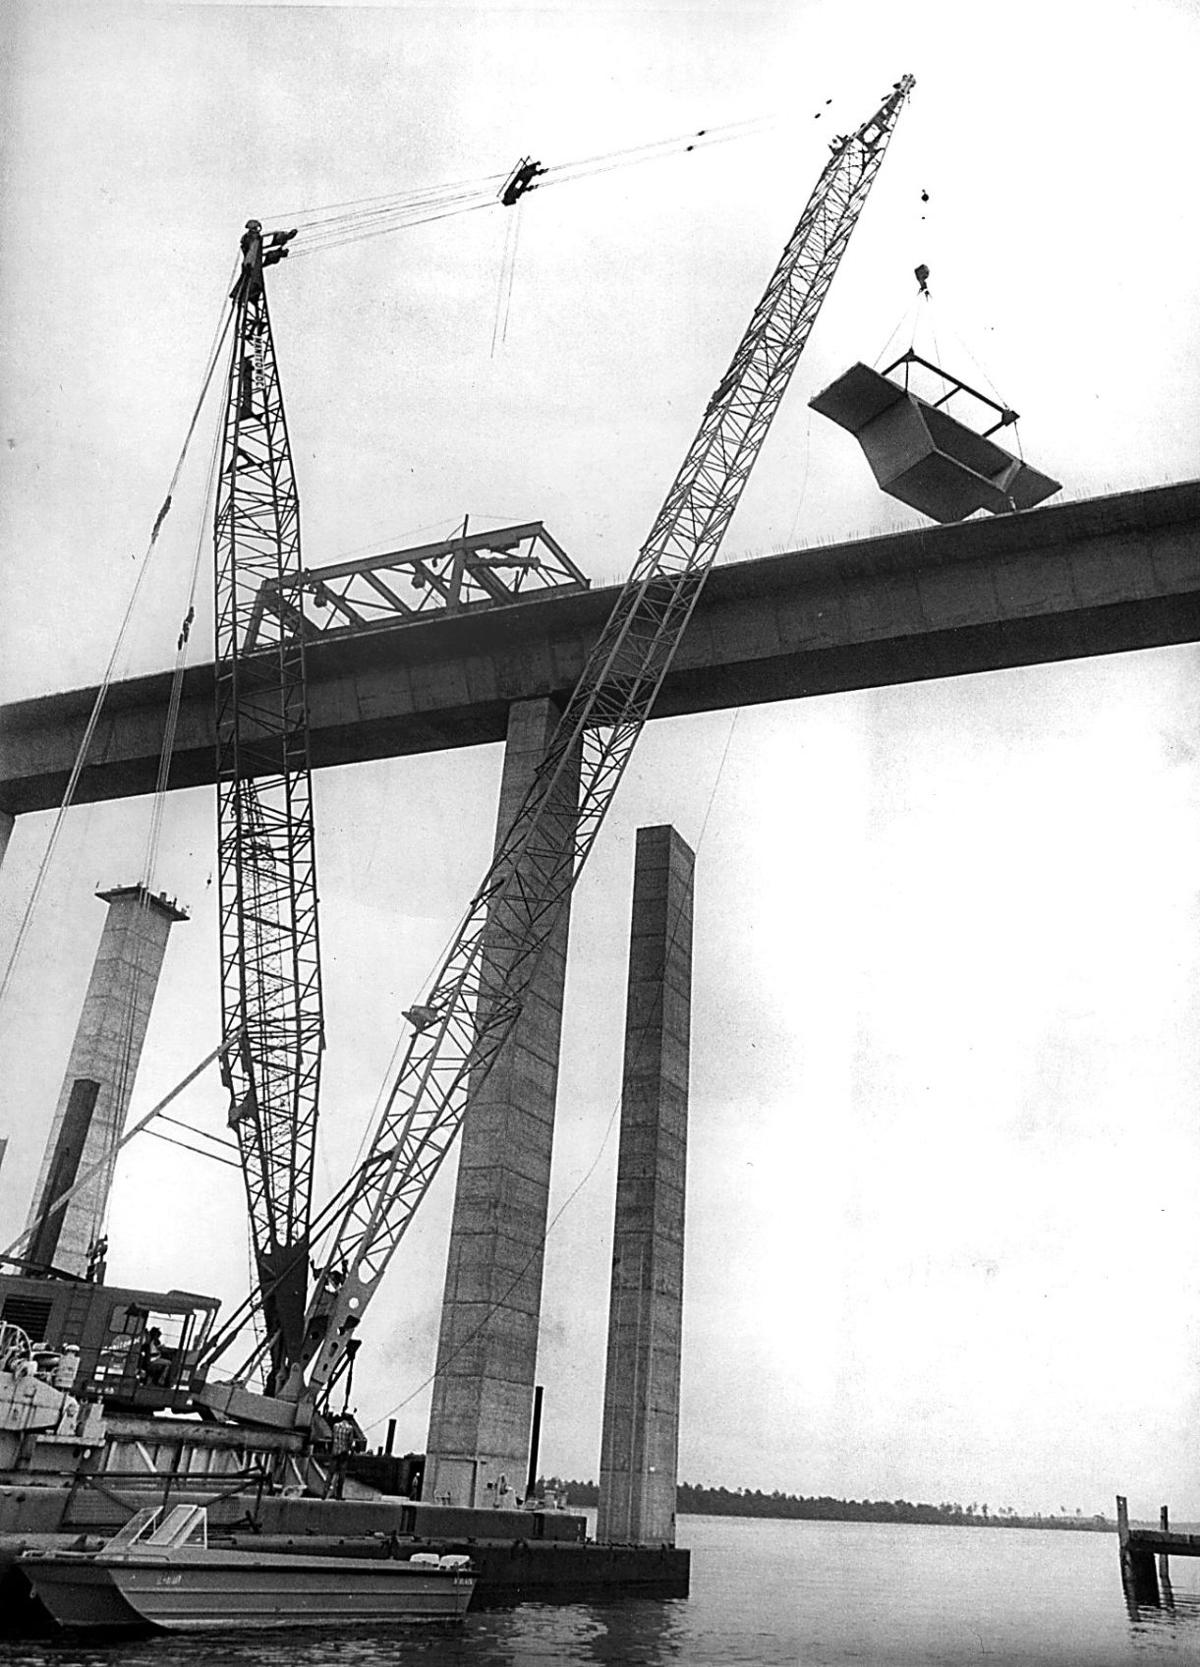 Renowned firm that designed Wando River bridge has ties to previous ...